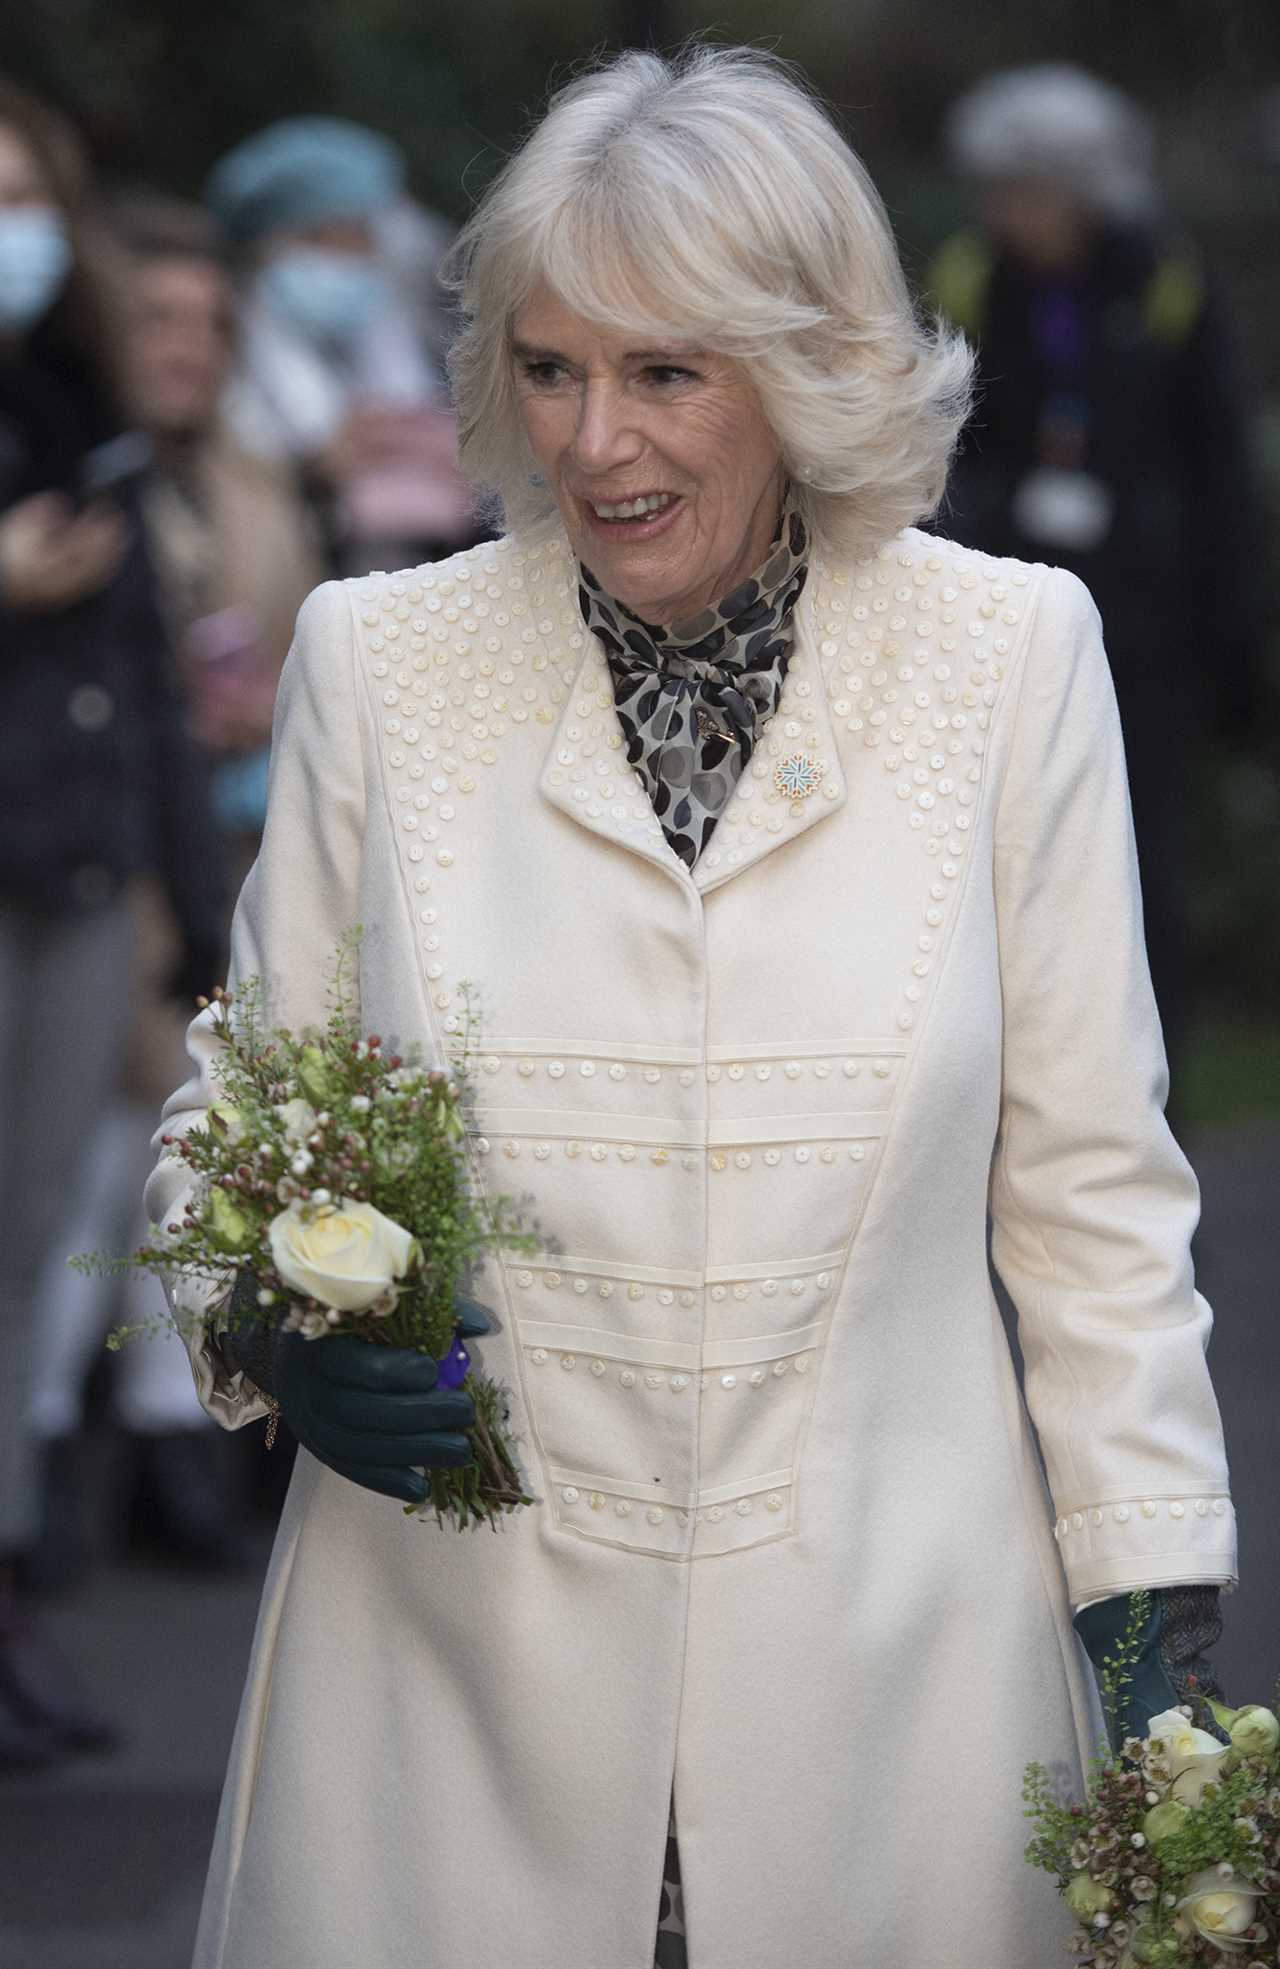 I’m proud to support Jabs Army, you give us hope for brighter days ahead, says Camilla